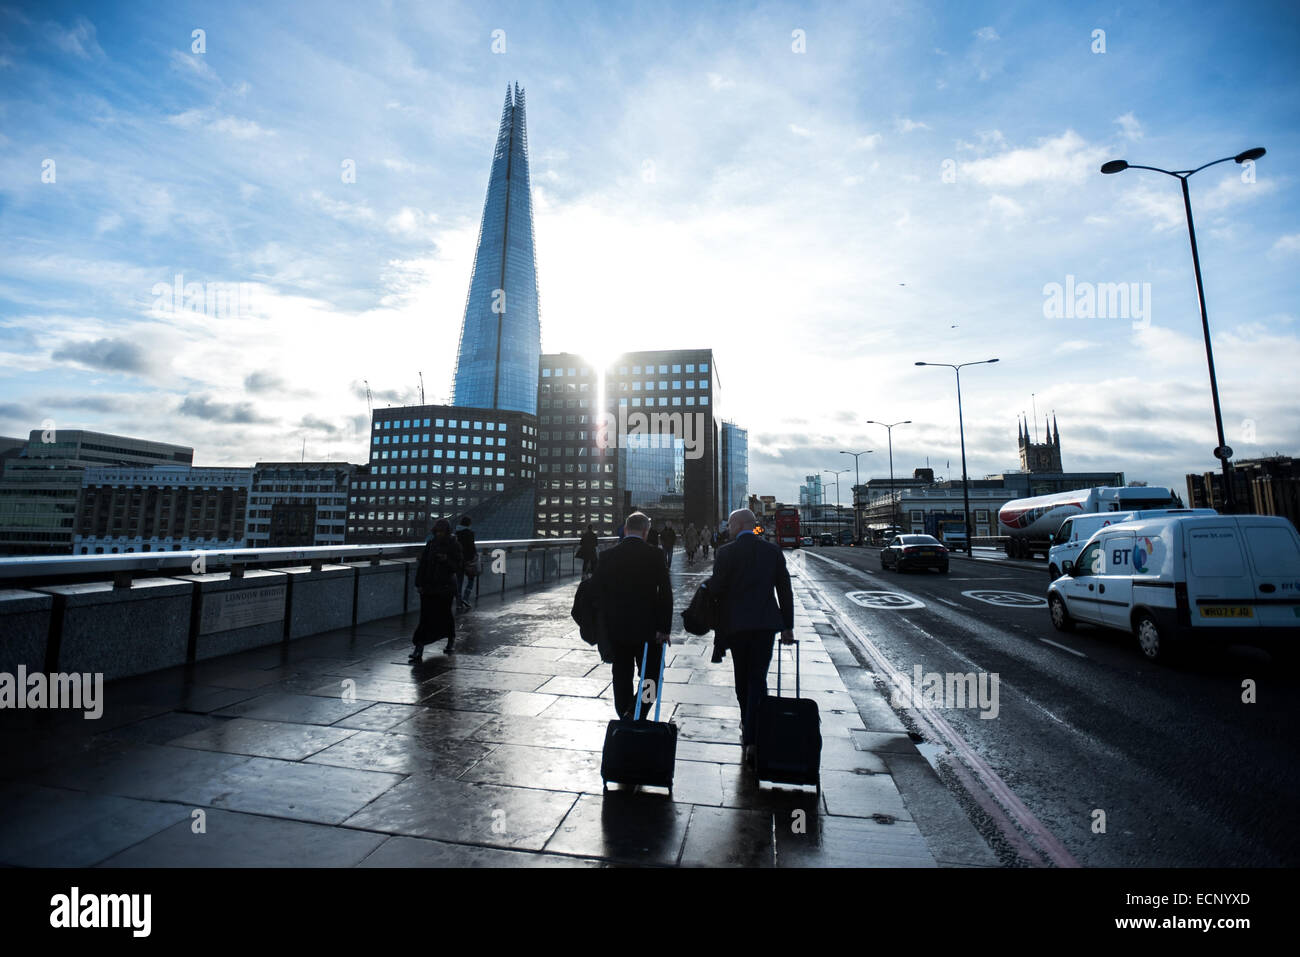 London, UK - 17 December 2014: businessmen with trolleys cross London Bridge as the sun shines behind buildings and The Shard Stock Photo